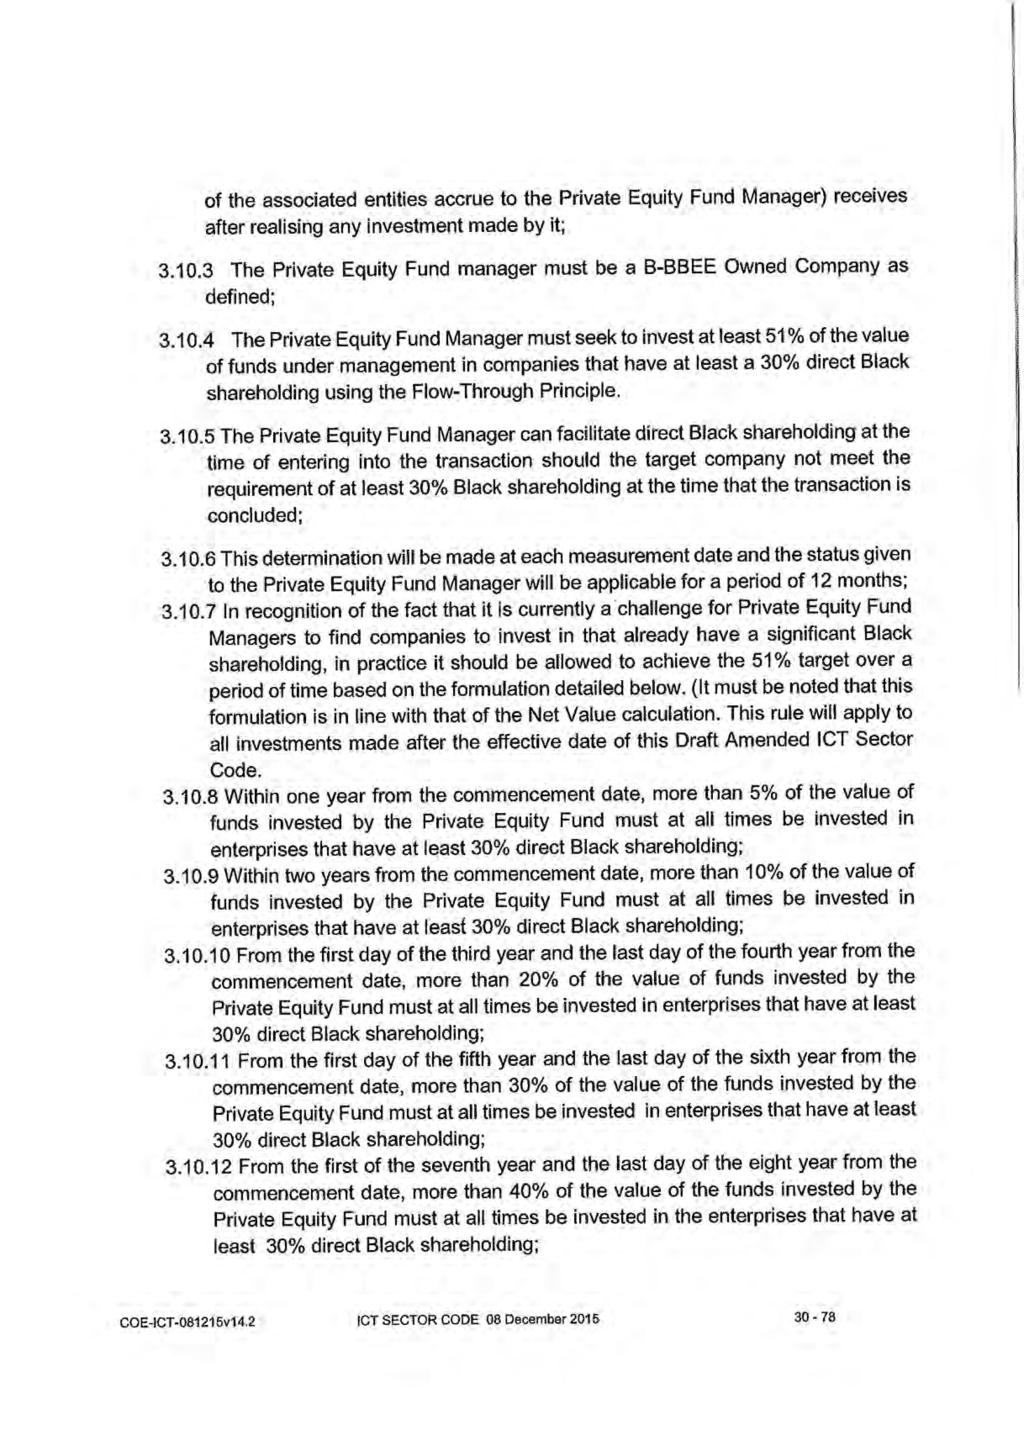 34 No. 39758 GOVERNMENT GAZETTE, 29 FEBRUARY 2016 of the associated entities accrue to the Private Equity Fund Manager) receives after realising any investment made by it; 3.10.